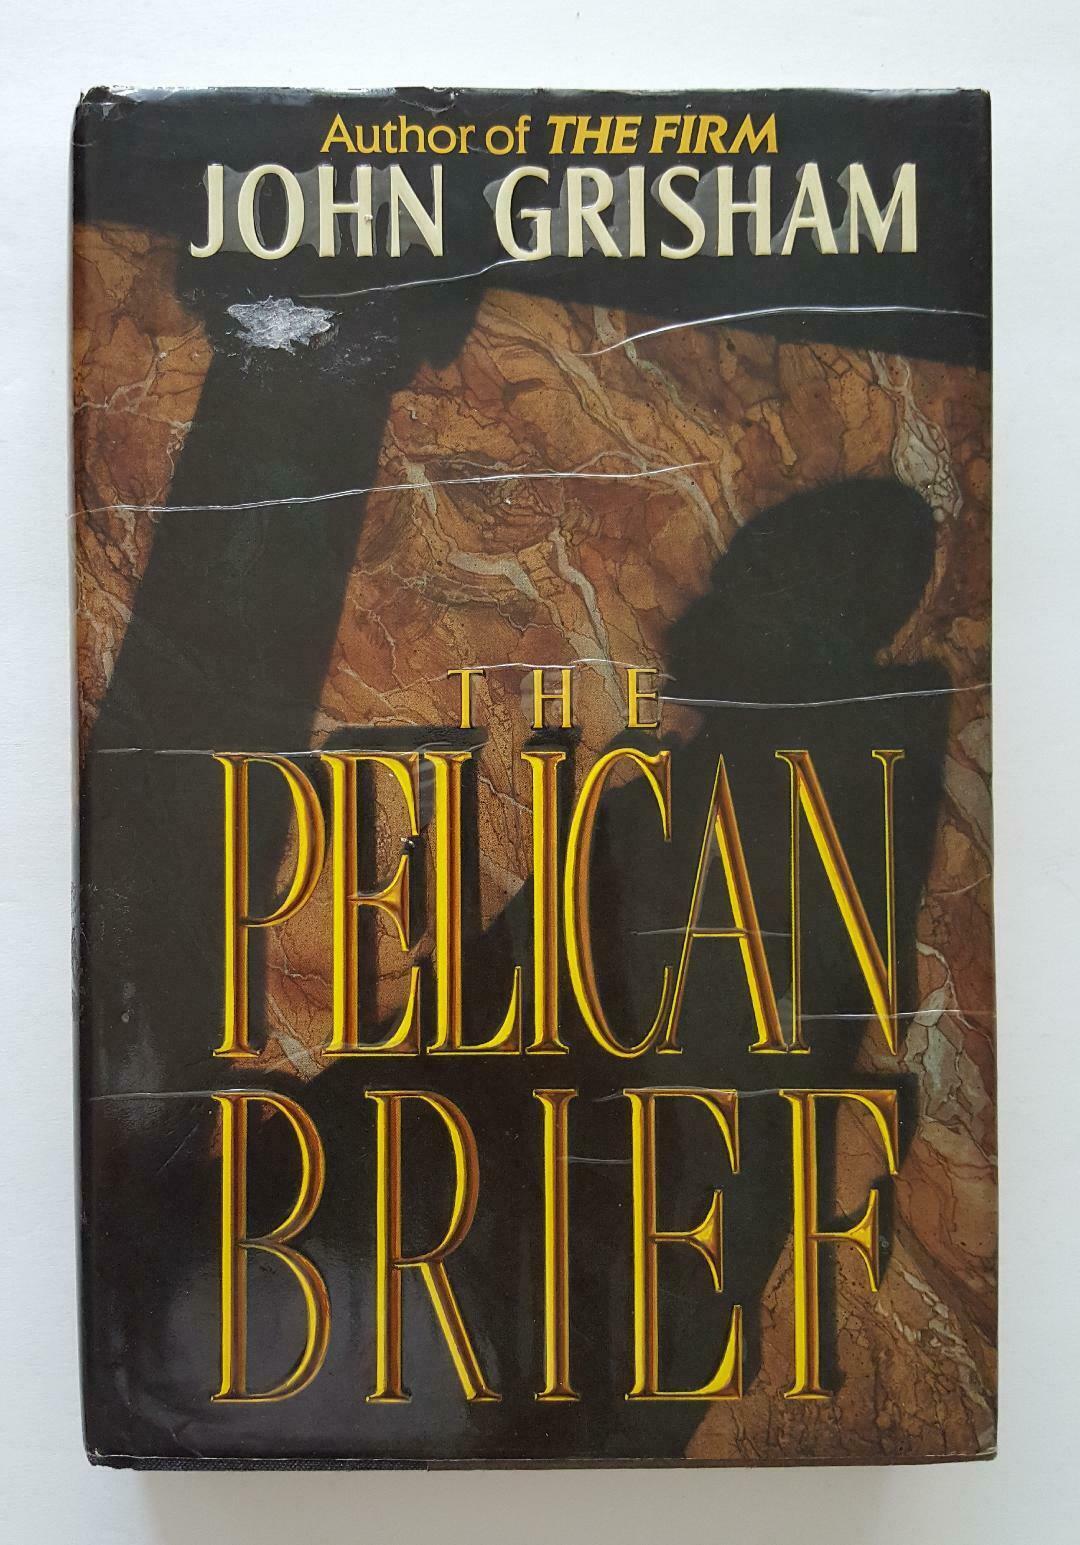 Primary image for The Pelican Brief by John Grisham 1992, Hardcover, Large Type